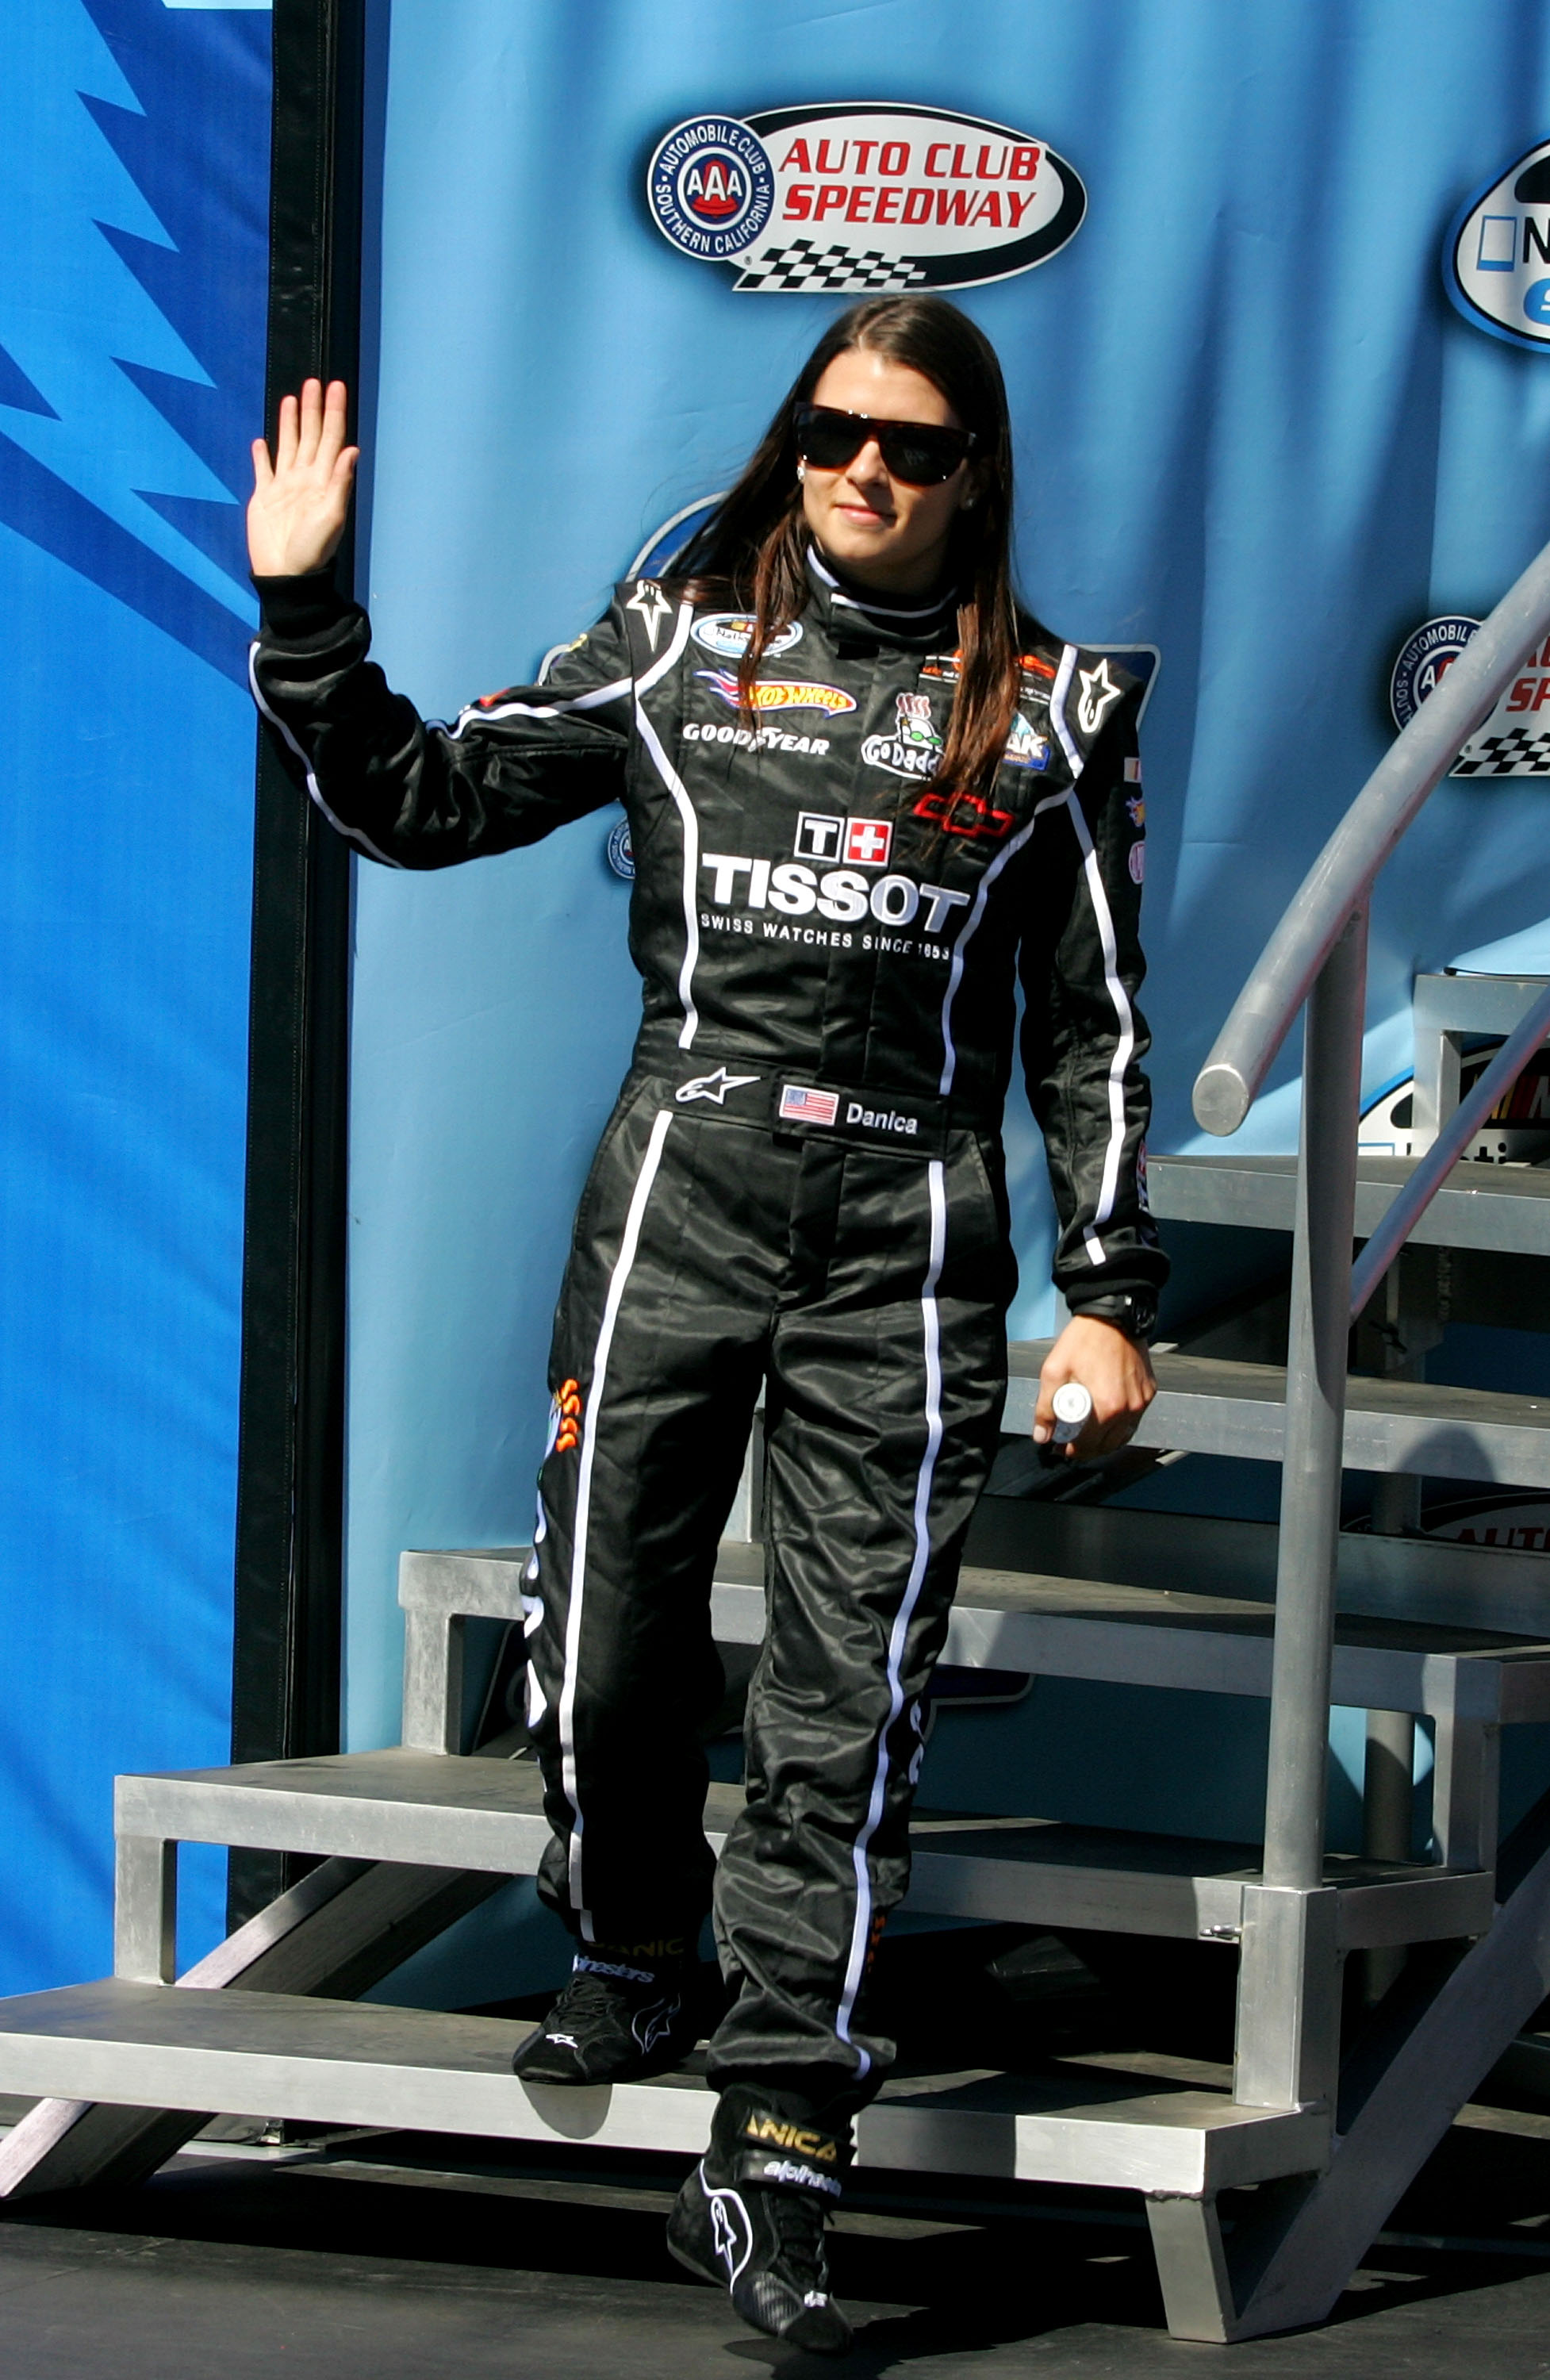 FONTANA, CA - OCTOBER 09: Danica Patrick, driver of the #7 Tissot/GoDaddy.com Chevrolet waves during driver introductions for the NASCAR Nationwide Series CampingWorld.com 300 on October 9, 2010 in Fontana, California.  (Photo by Jerry Markland/Getty Imag